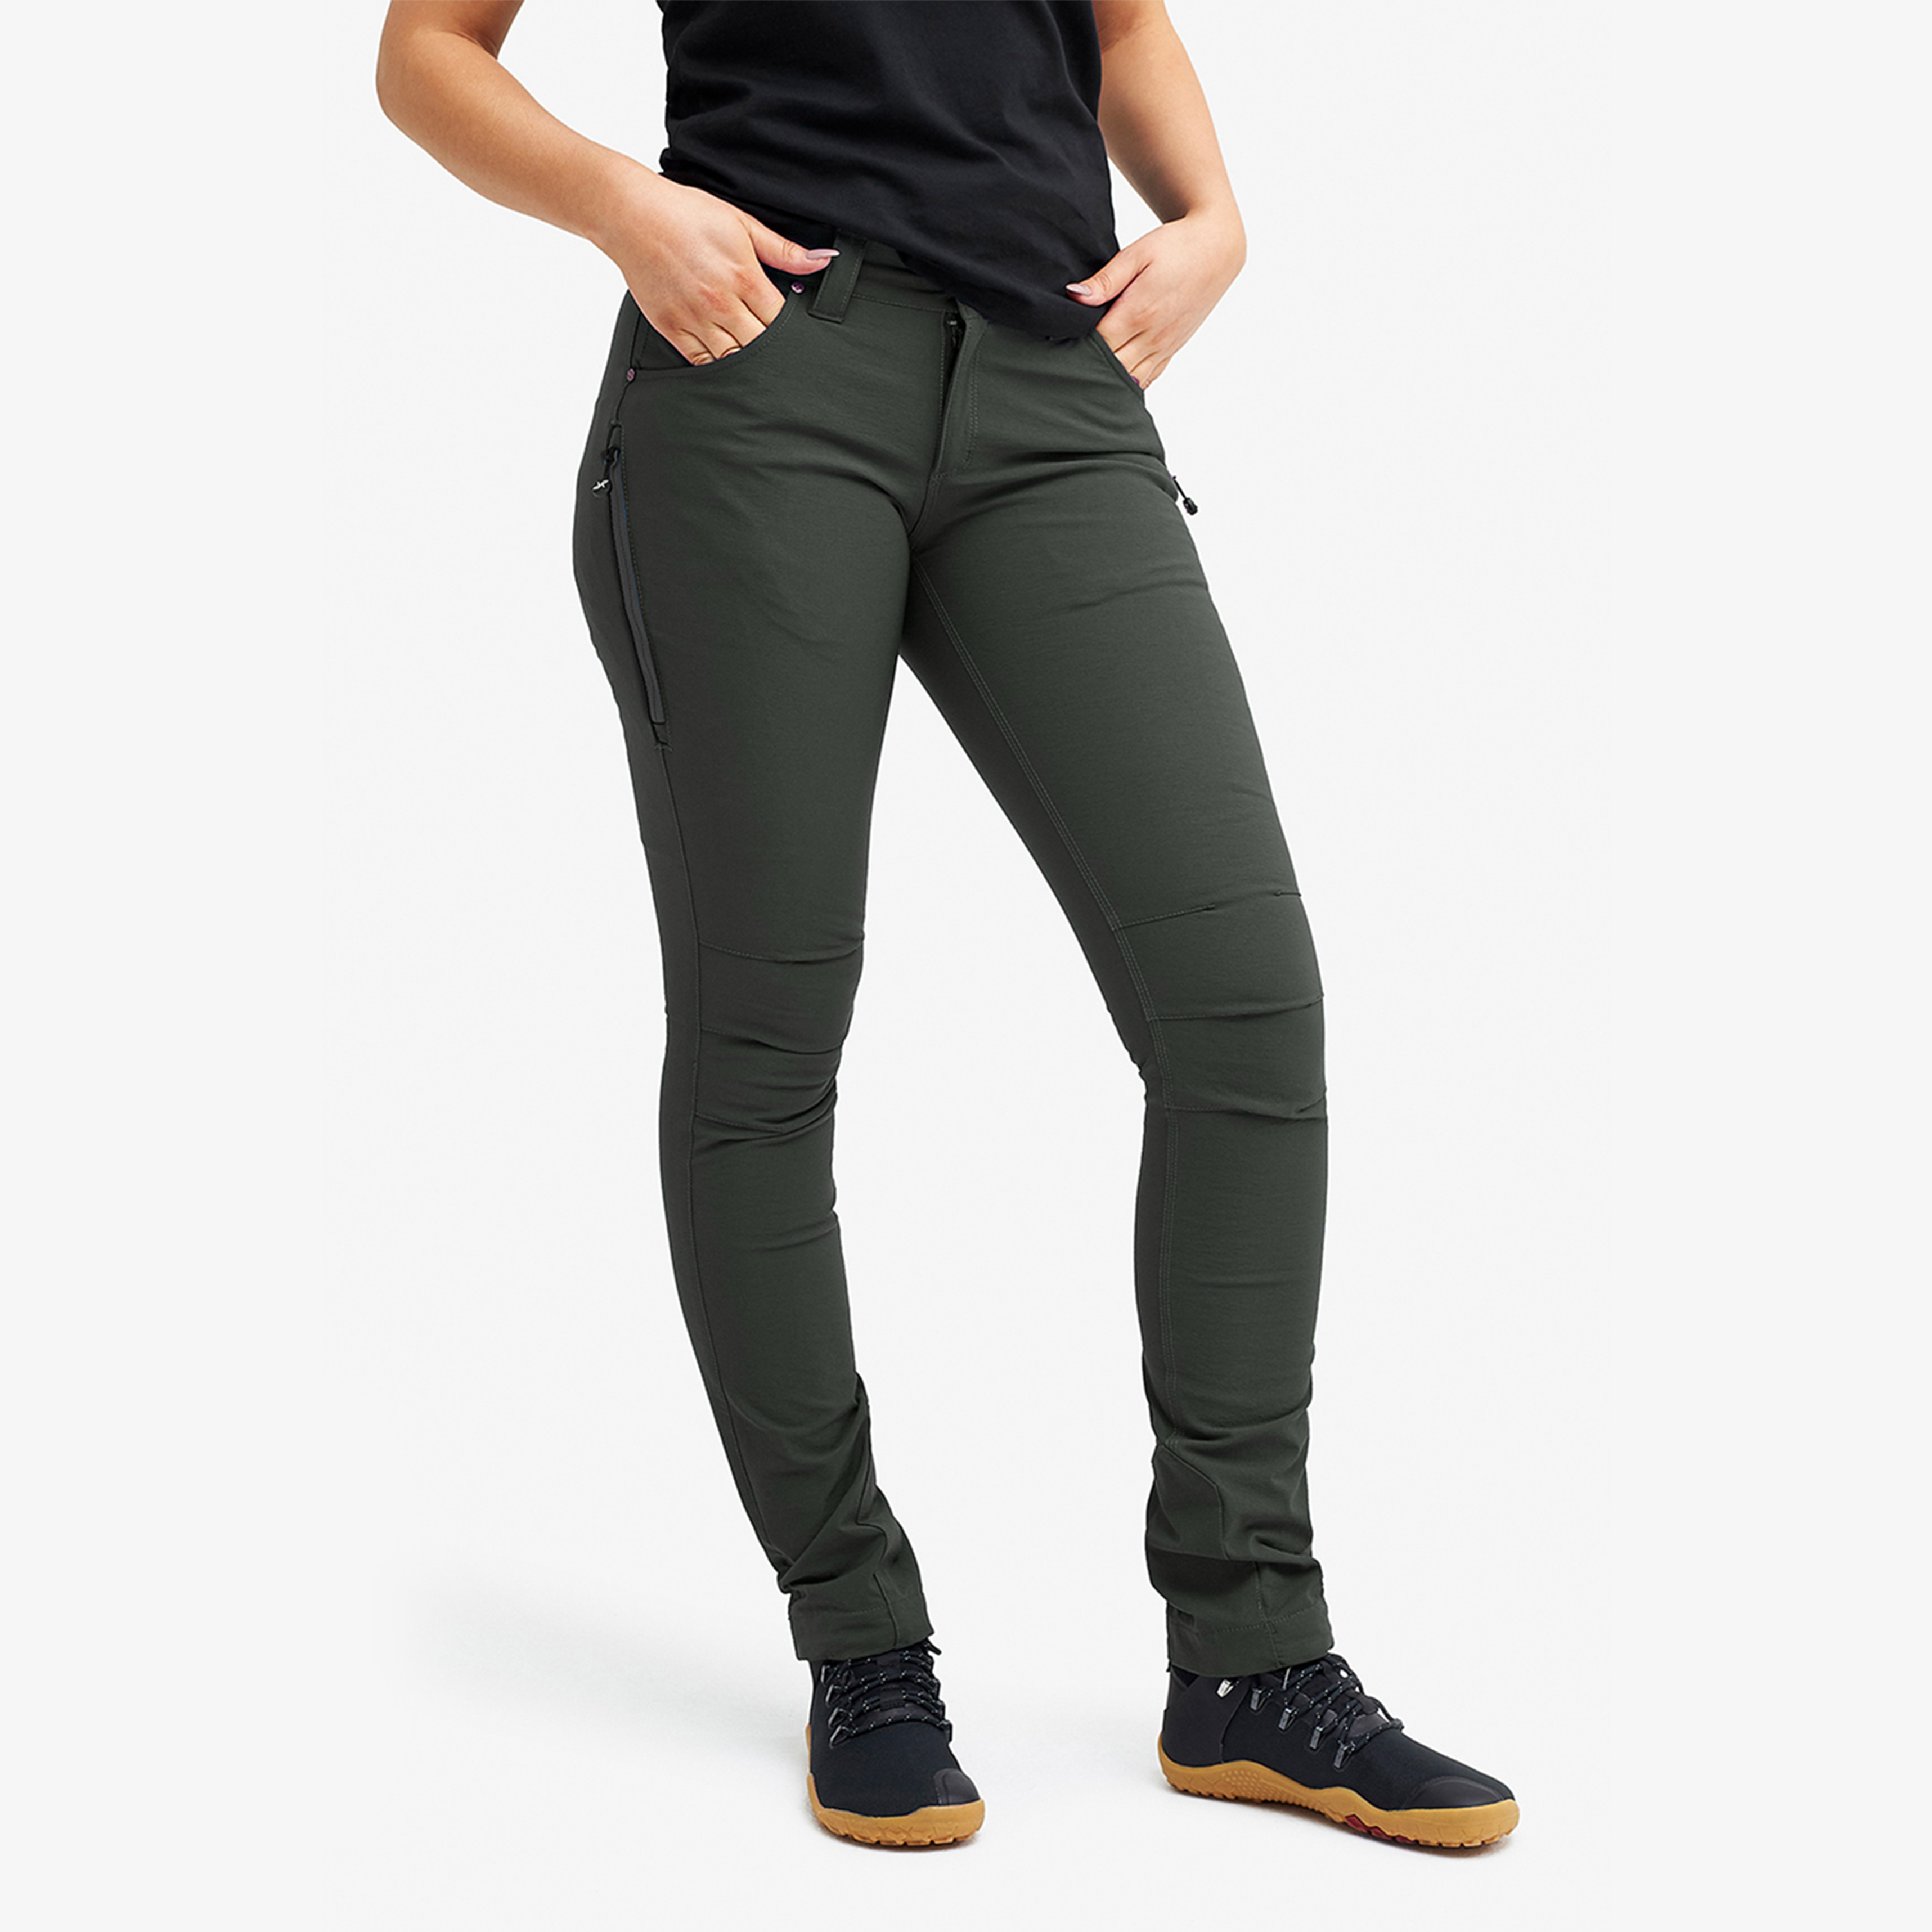 Adrenaline Outdoor Jeans Pirate Black Mujeres